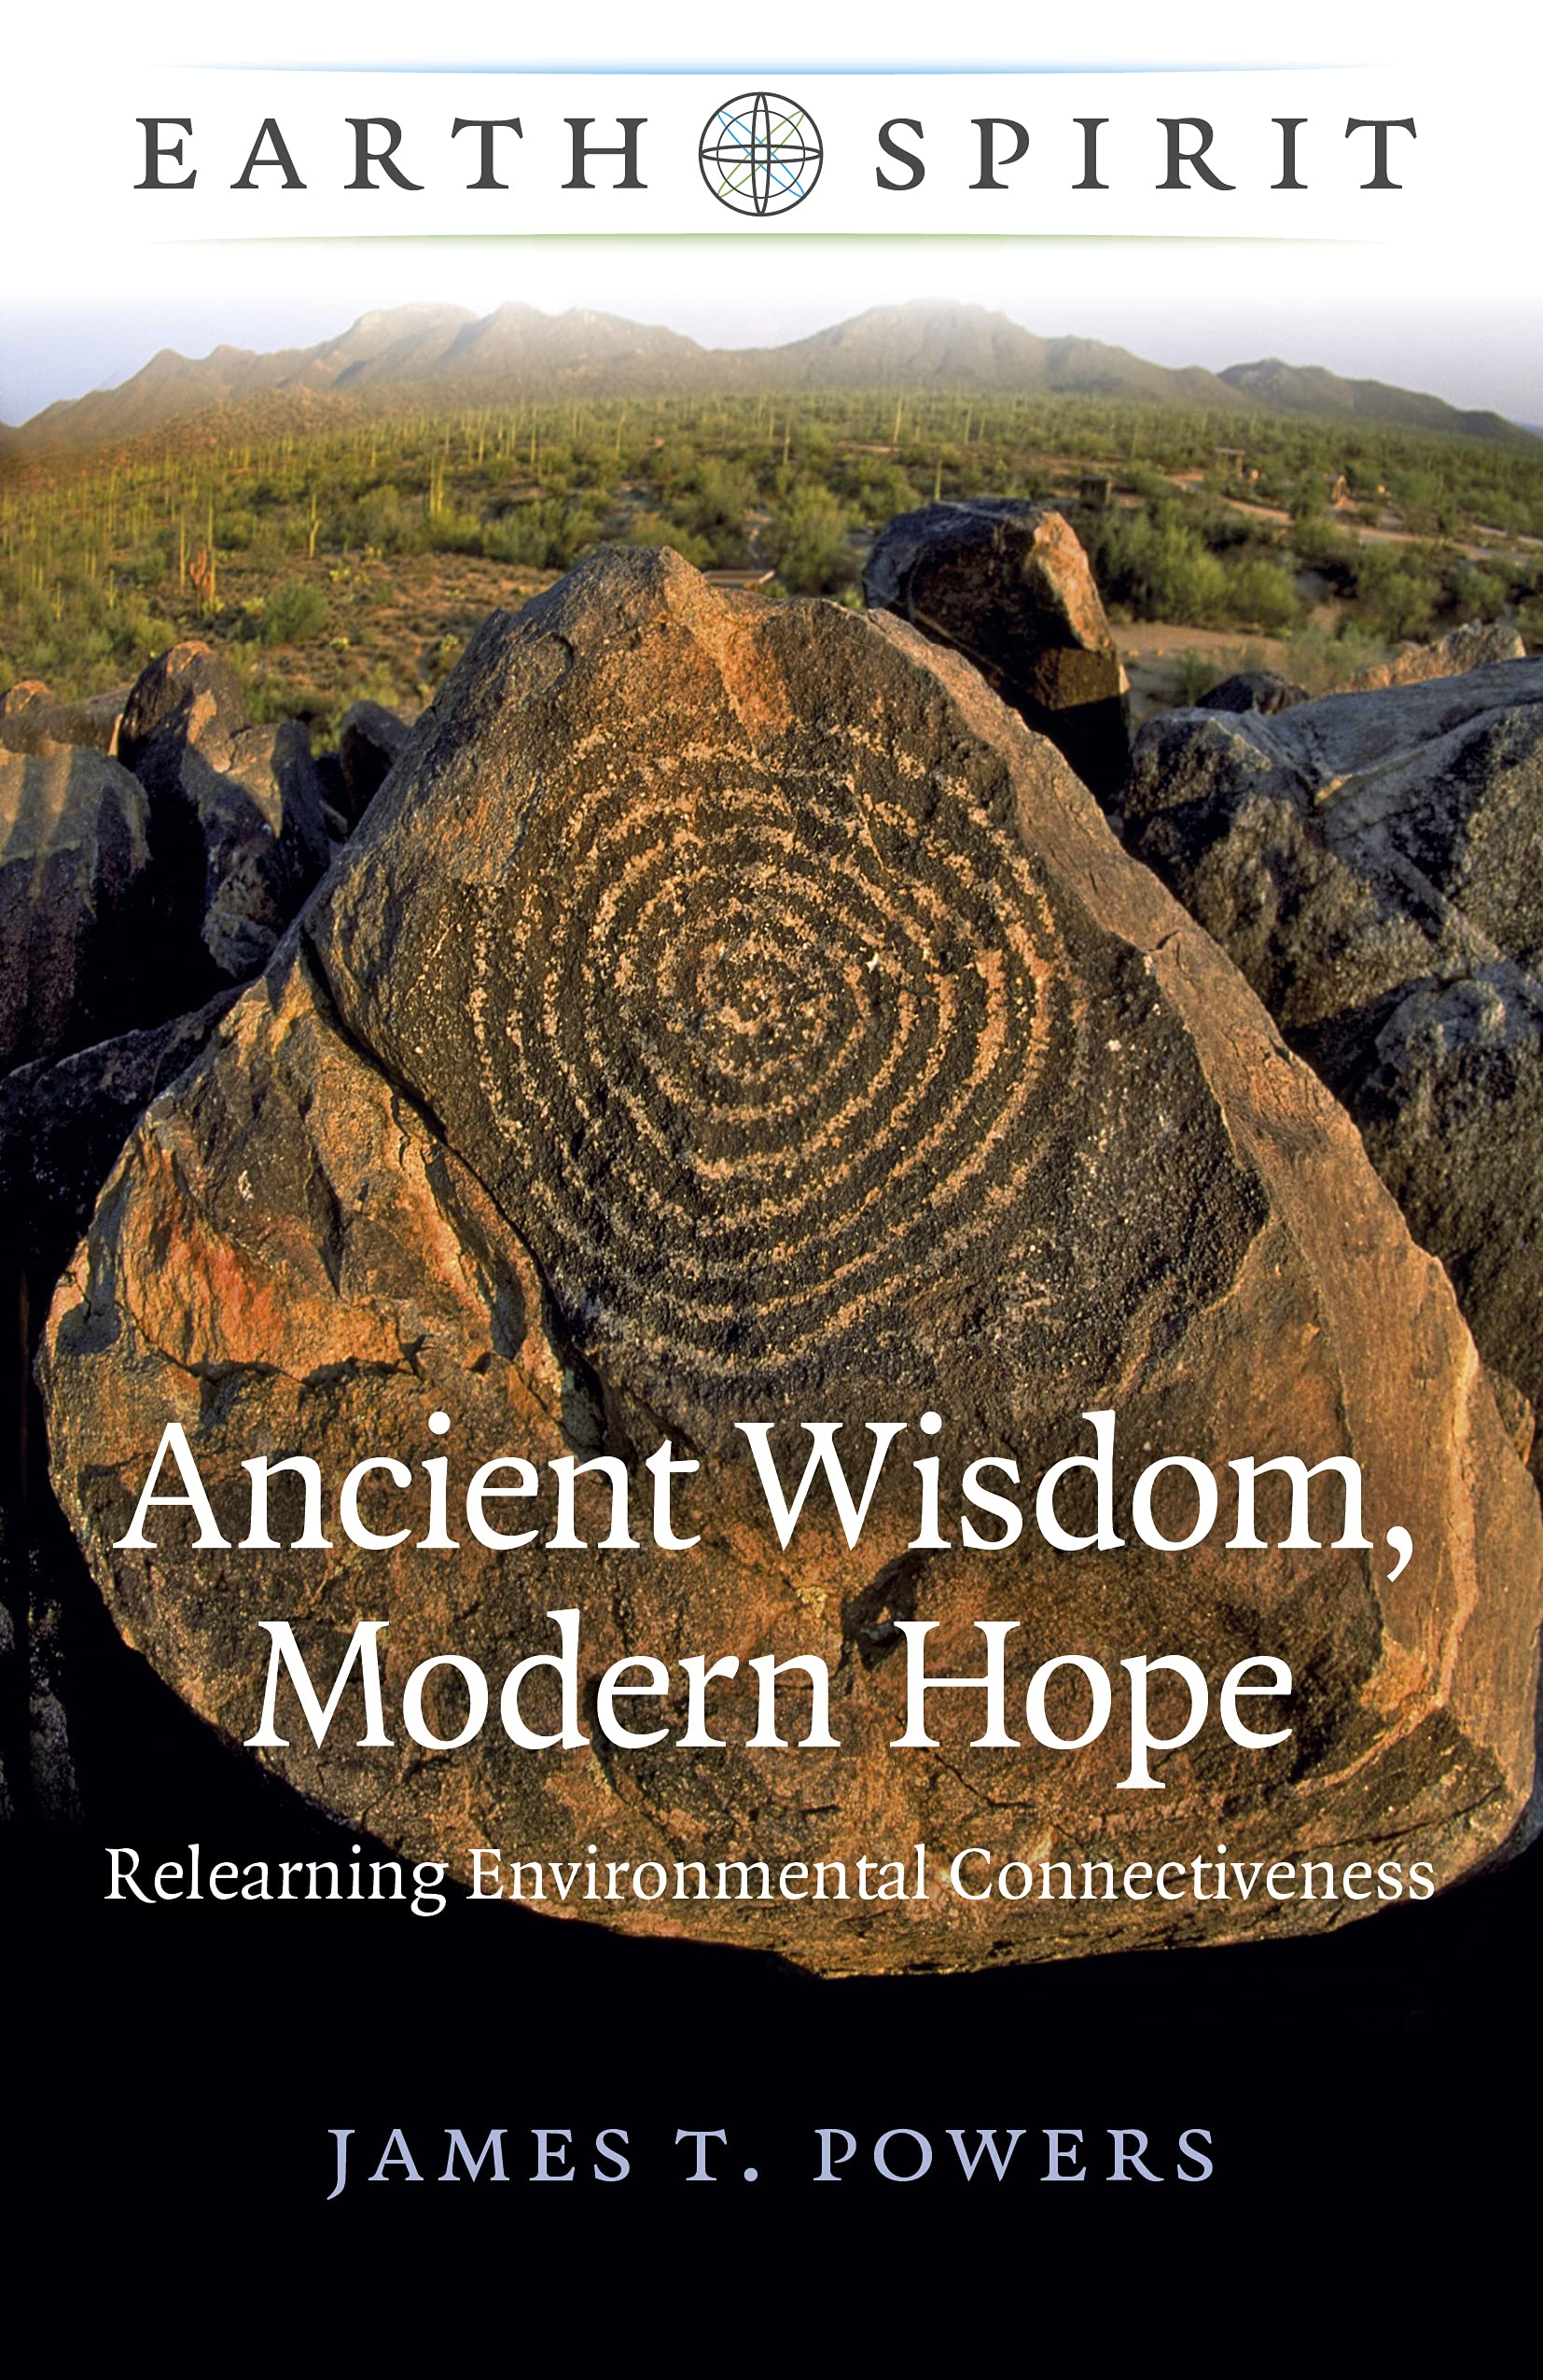 Earth Spirit: Ancient Wisdom, Modern Hope - Relearning Environmental Connectiveness